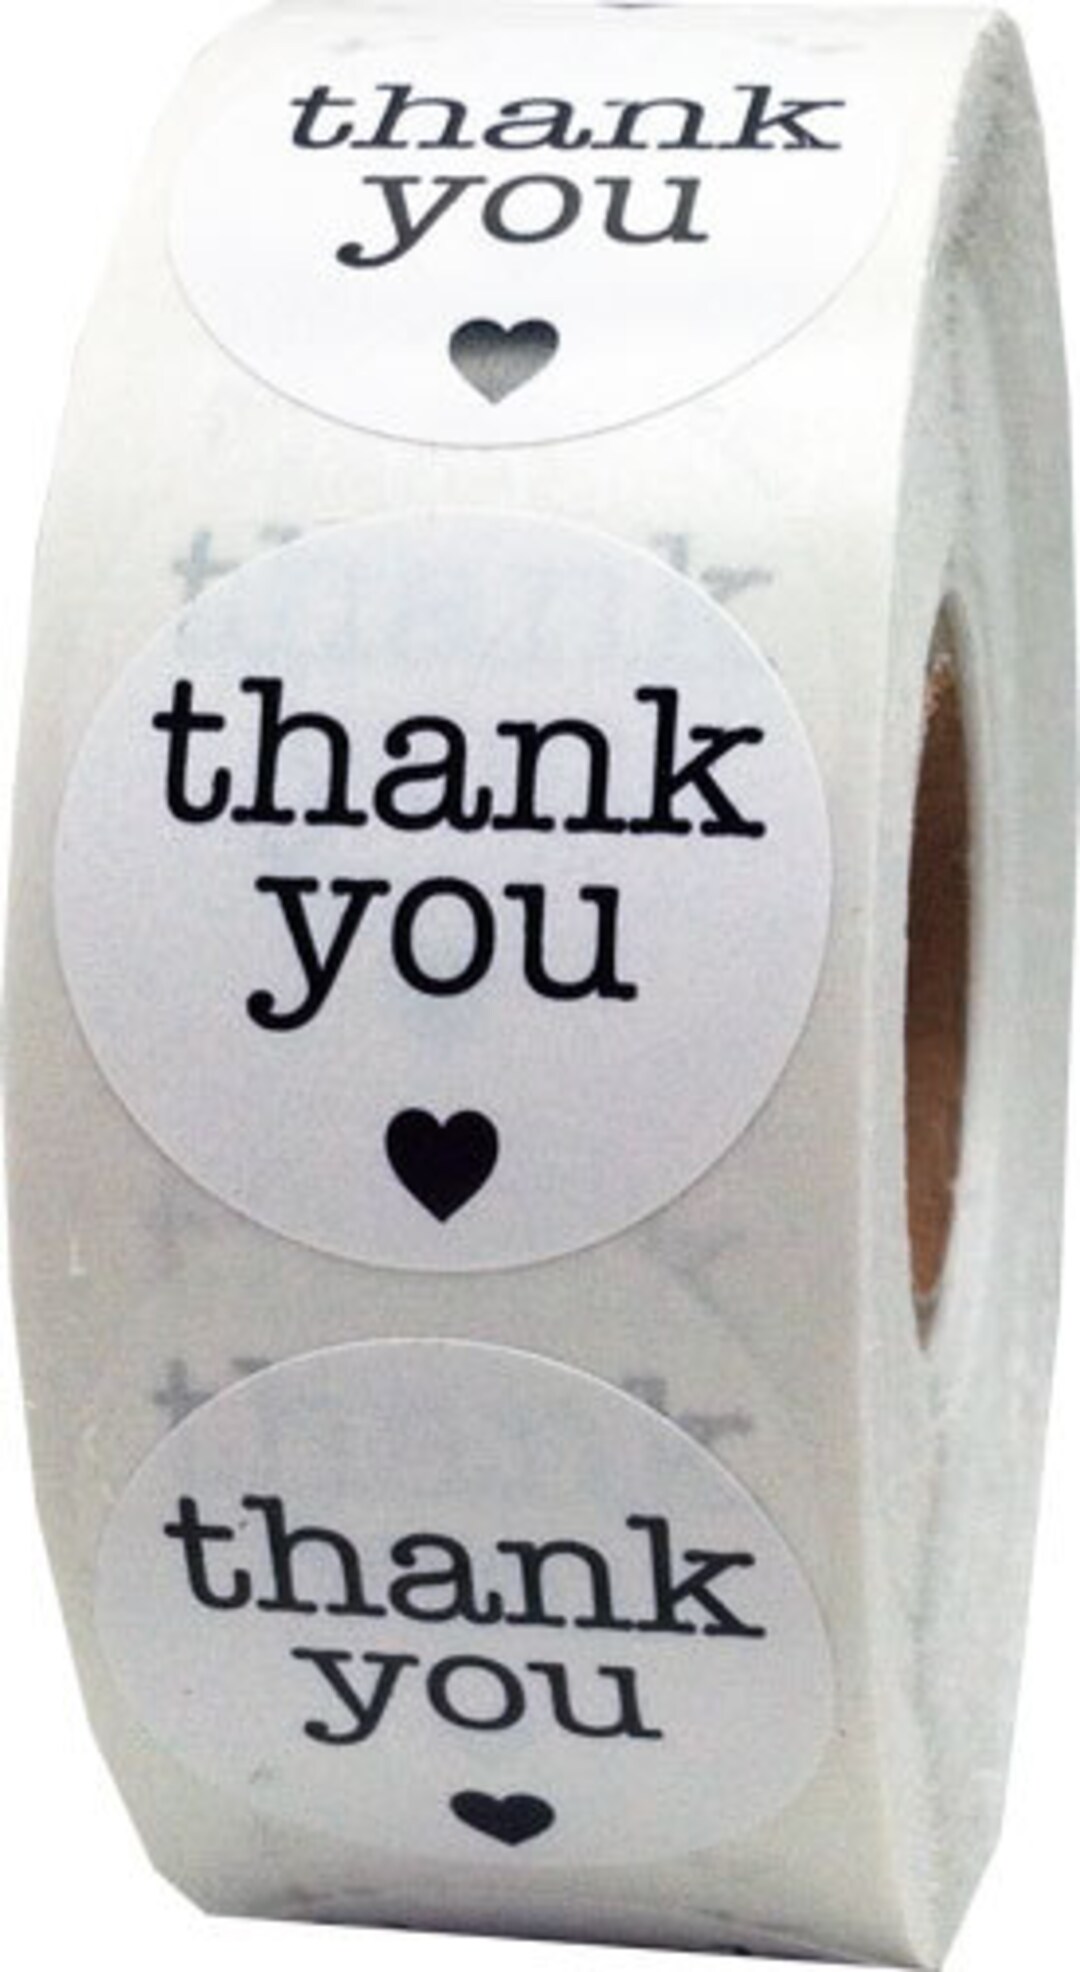 1 Inch White/black Round Thank You Stickers Adhesive - Etsy